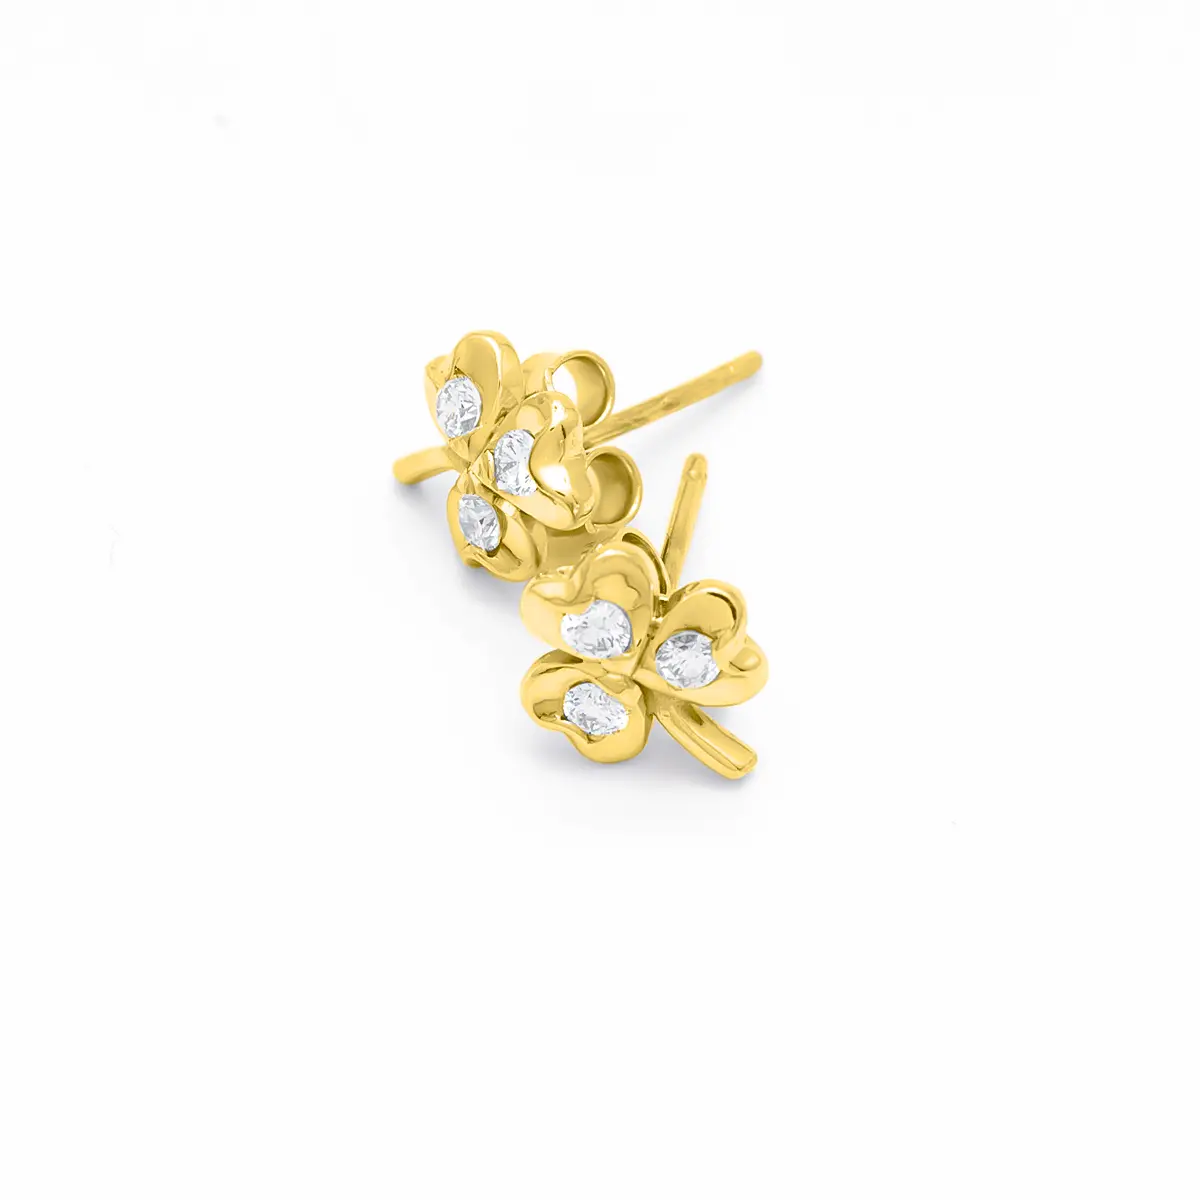 3 Stone Diamond Shamrock Stud Earrings Uniquely Crafted In 14k Gold 3...